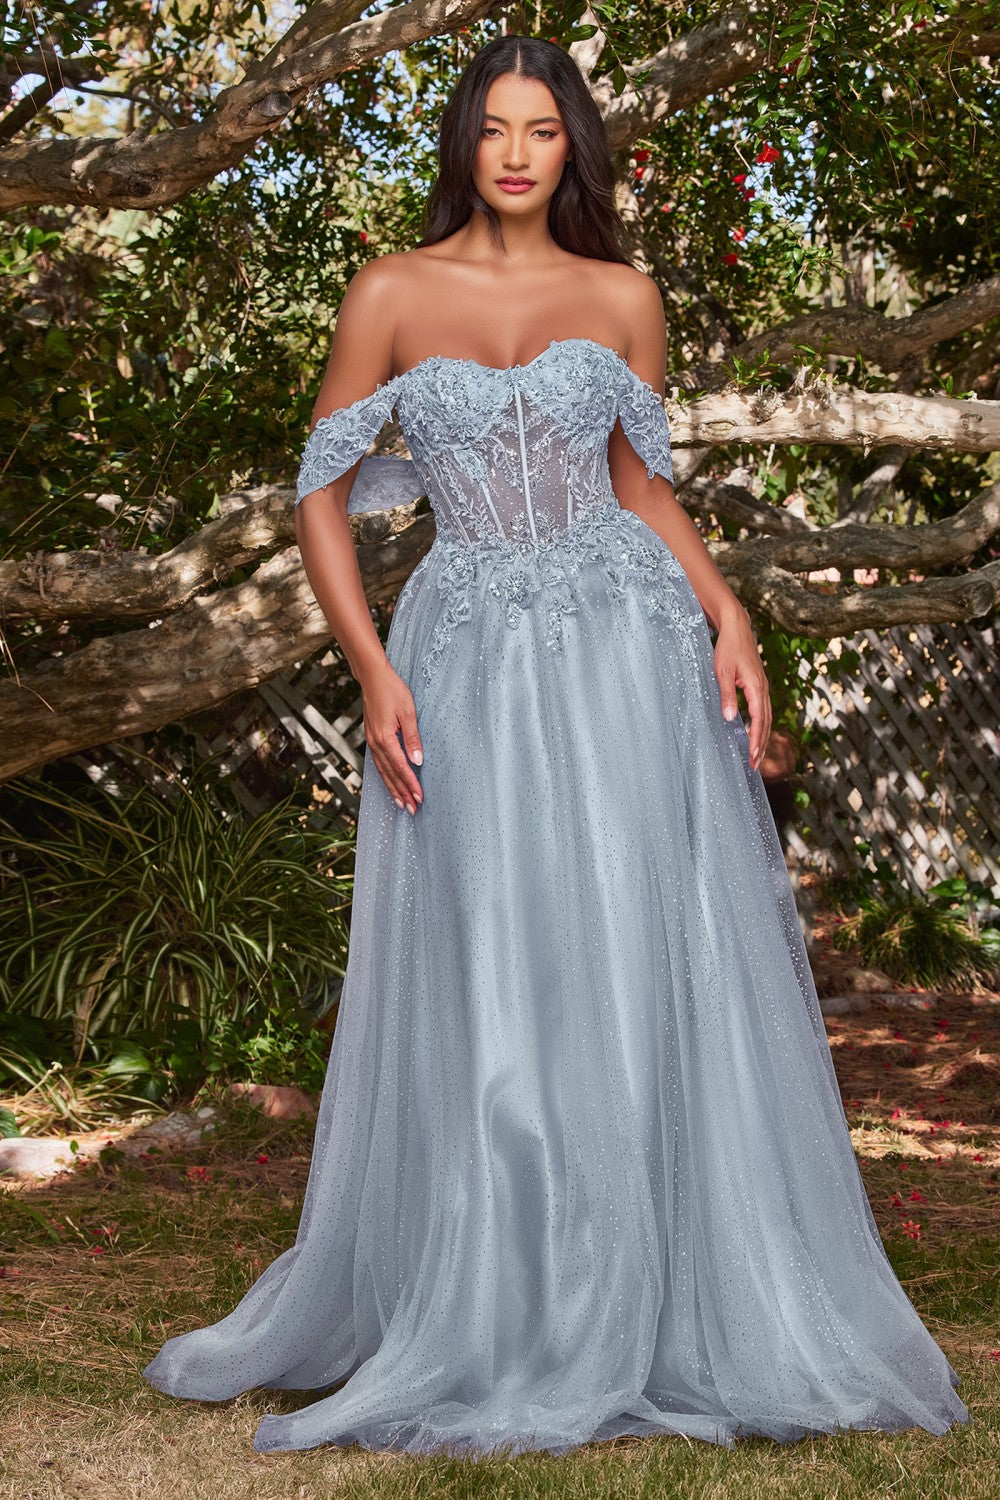 Whimsy Off the Shoulder Ballgown Prom Dress 740198TRR-SmokeyBlue